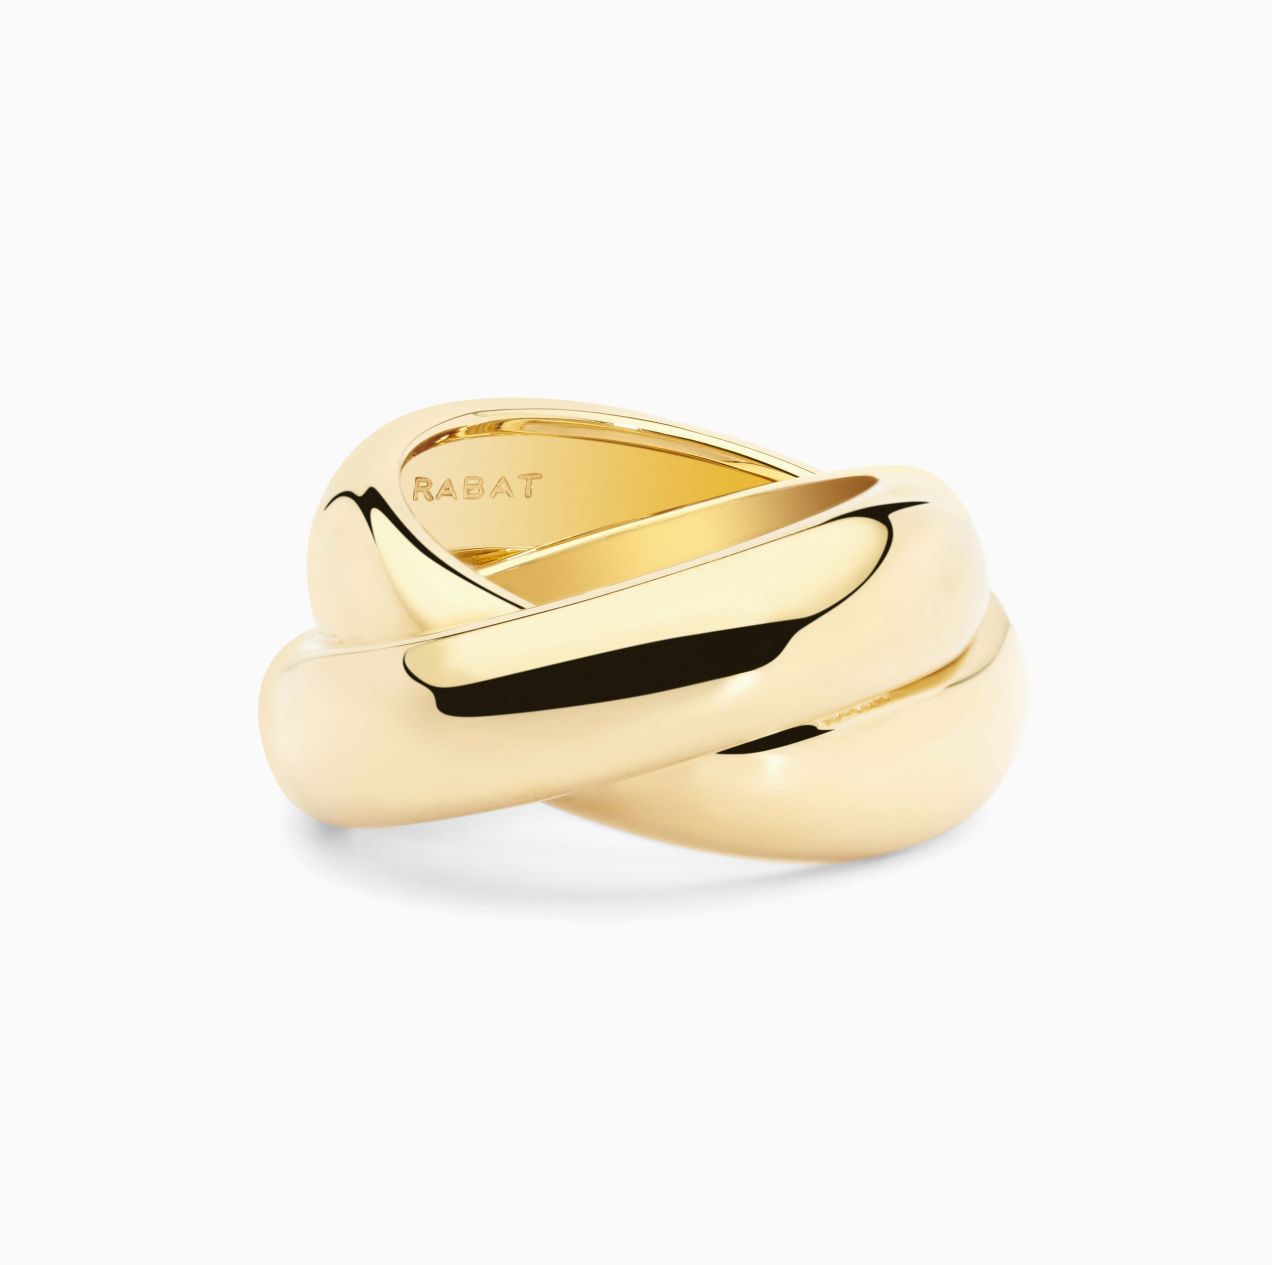 Yellow gold twisted knot ring